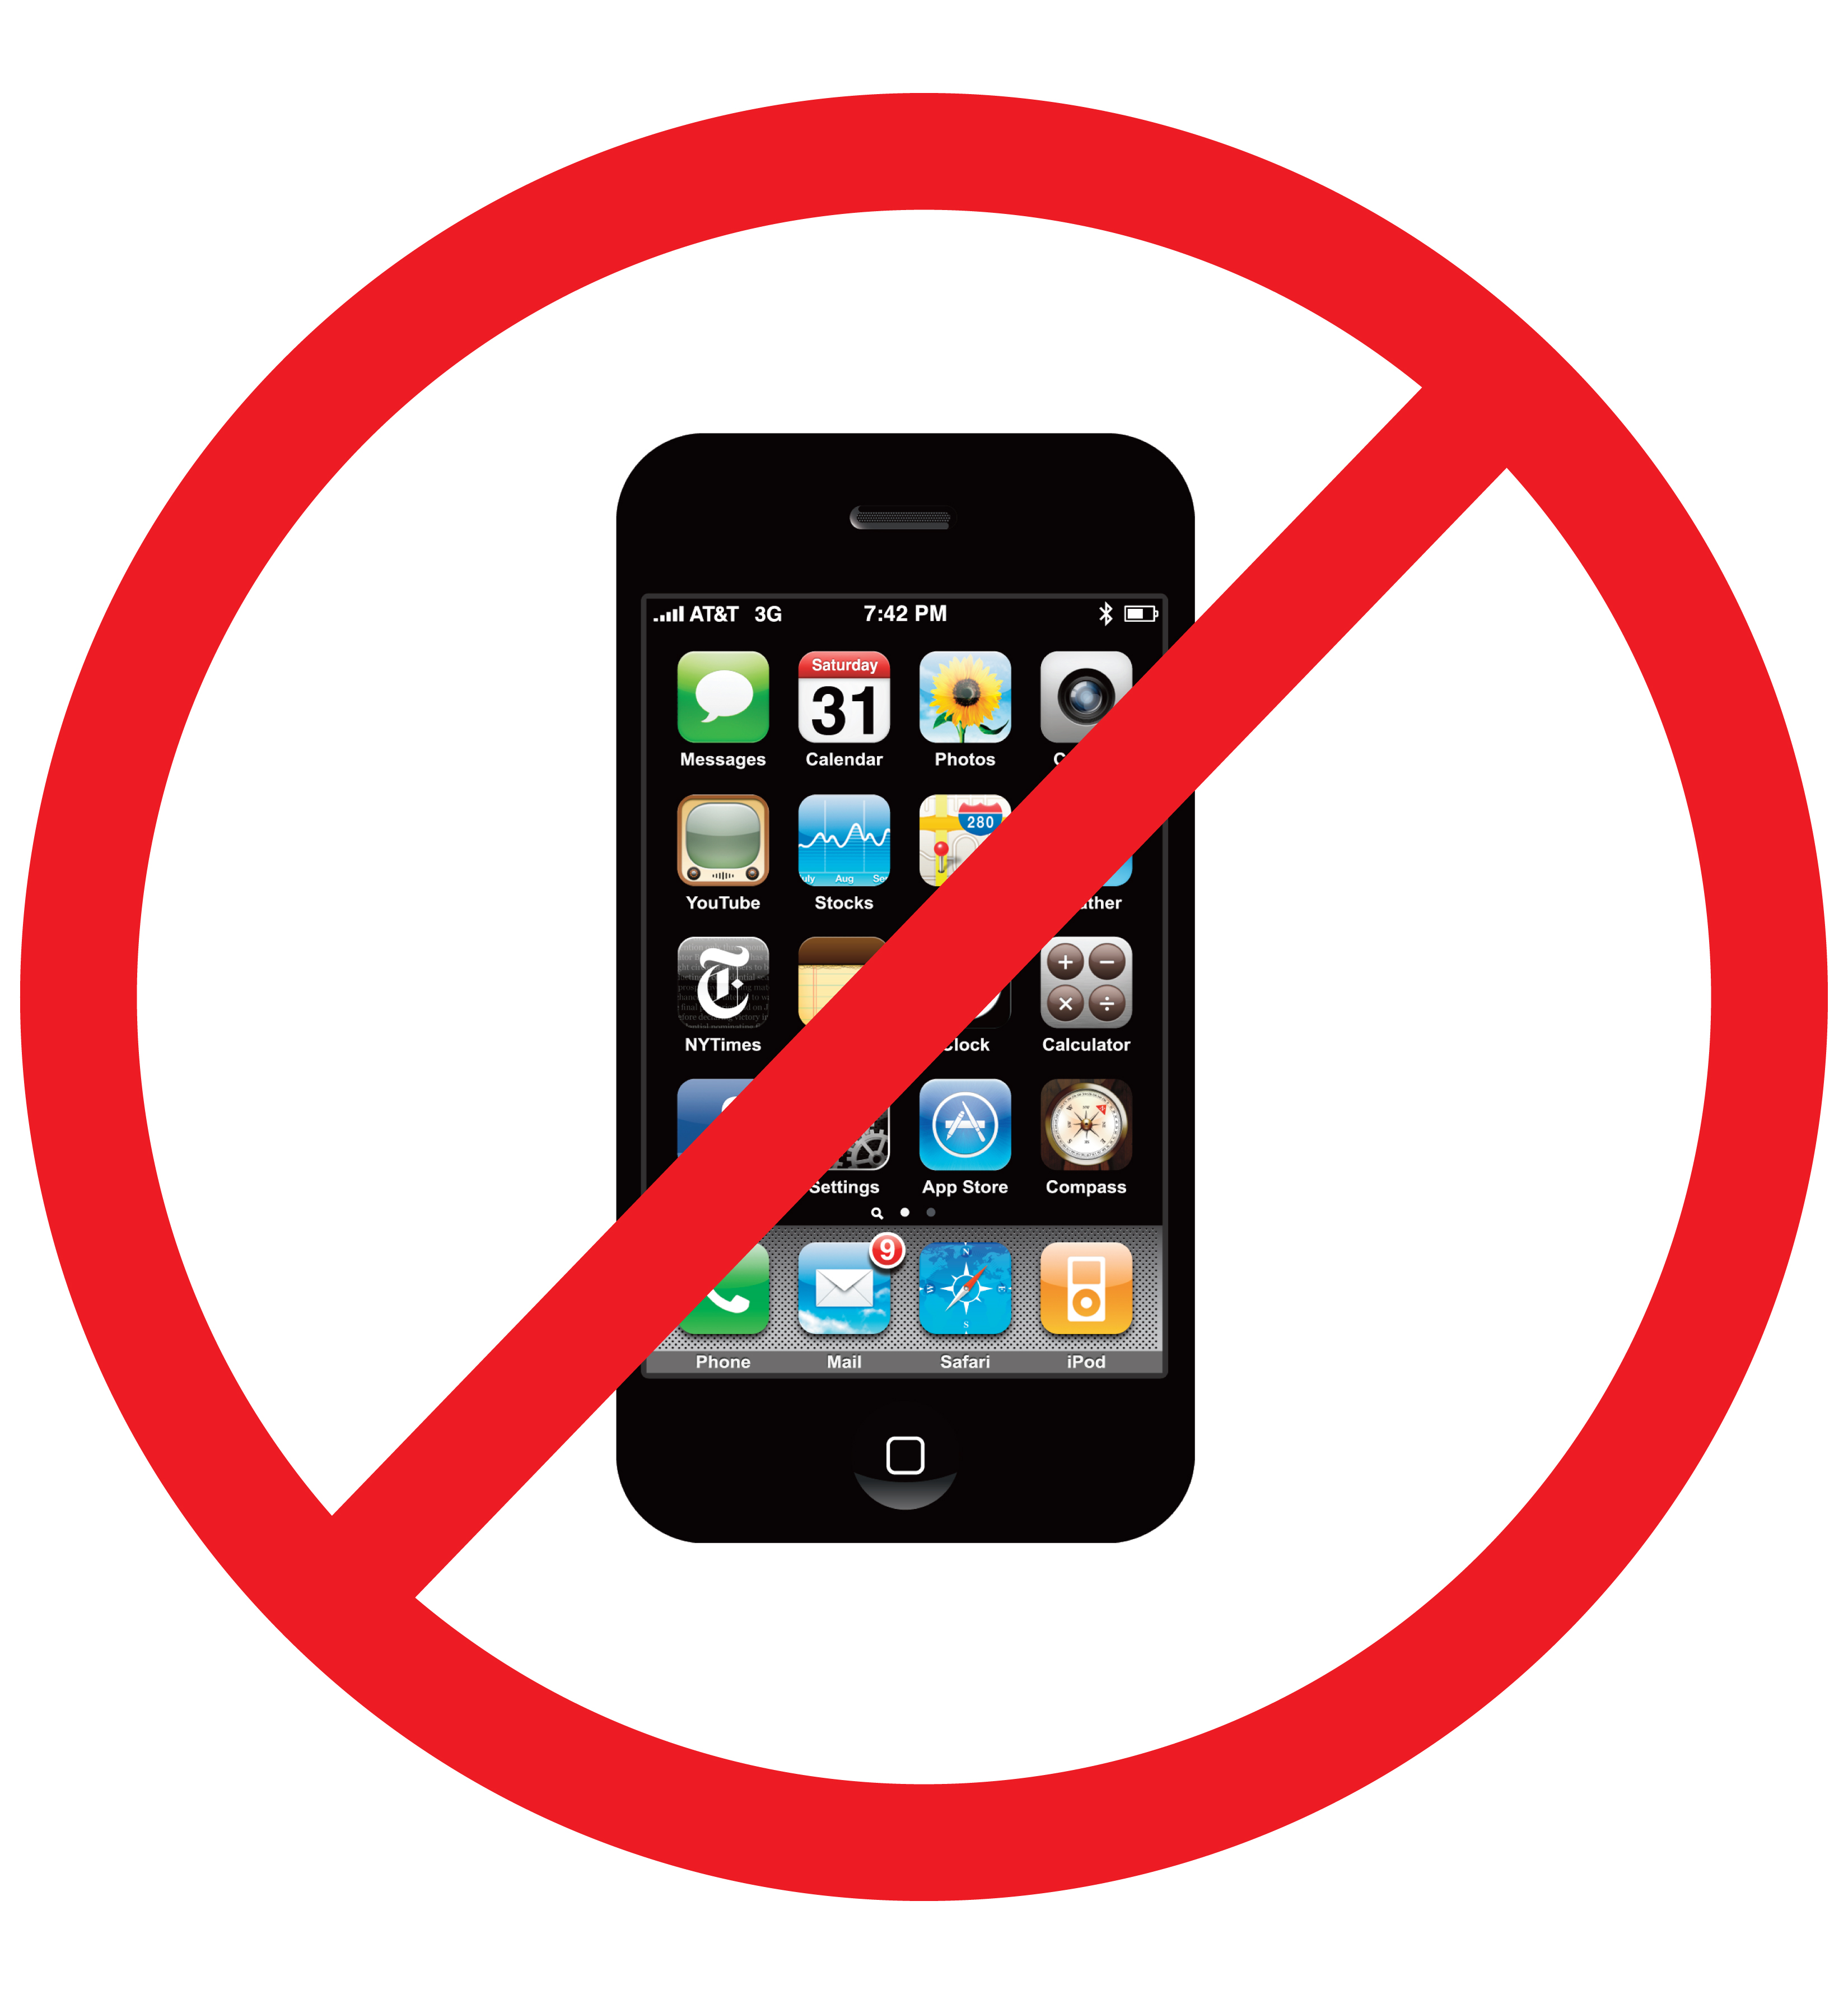 No Cell Phone Sign | Free Download Clip Art | Free Clip Art | on ...